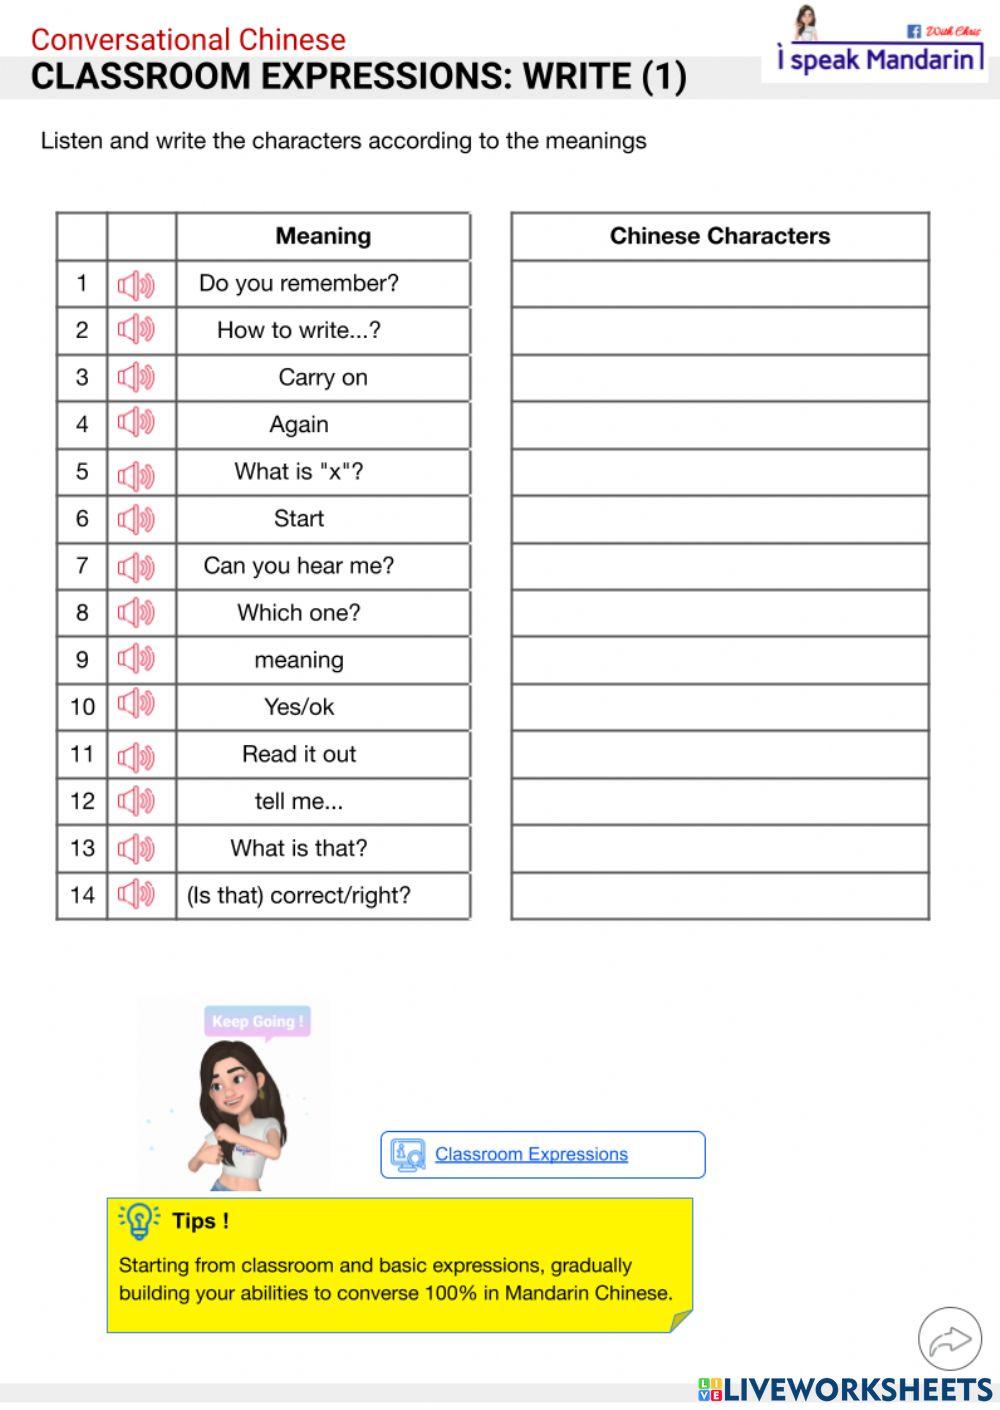 Classroom expressions: write (1)